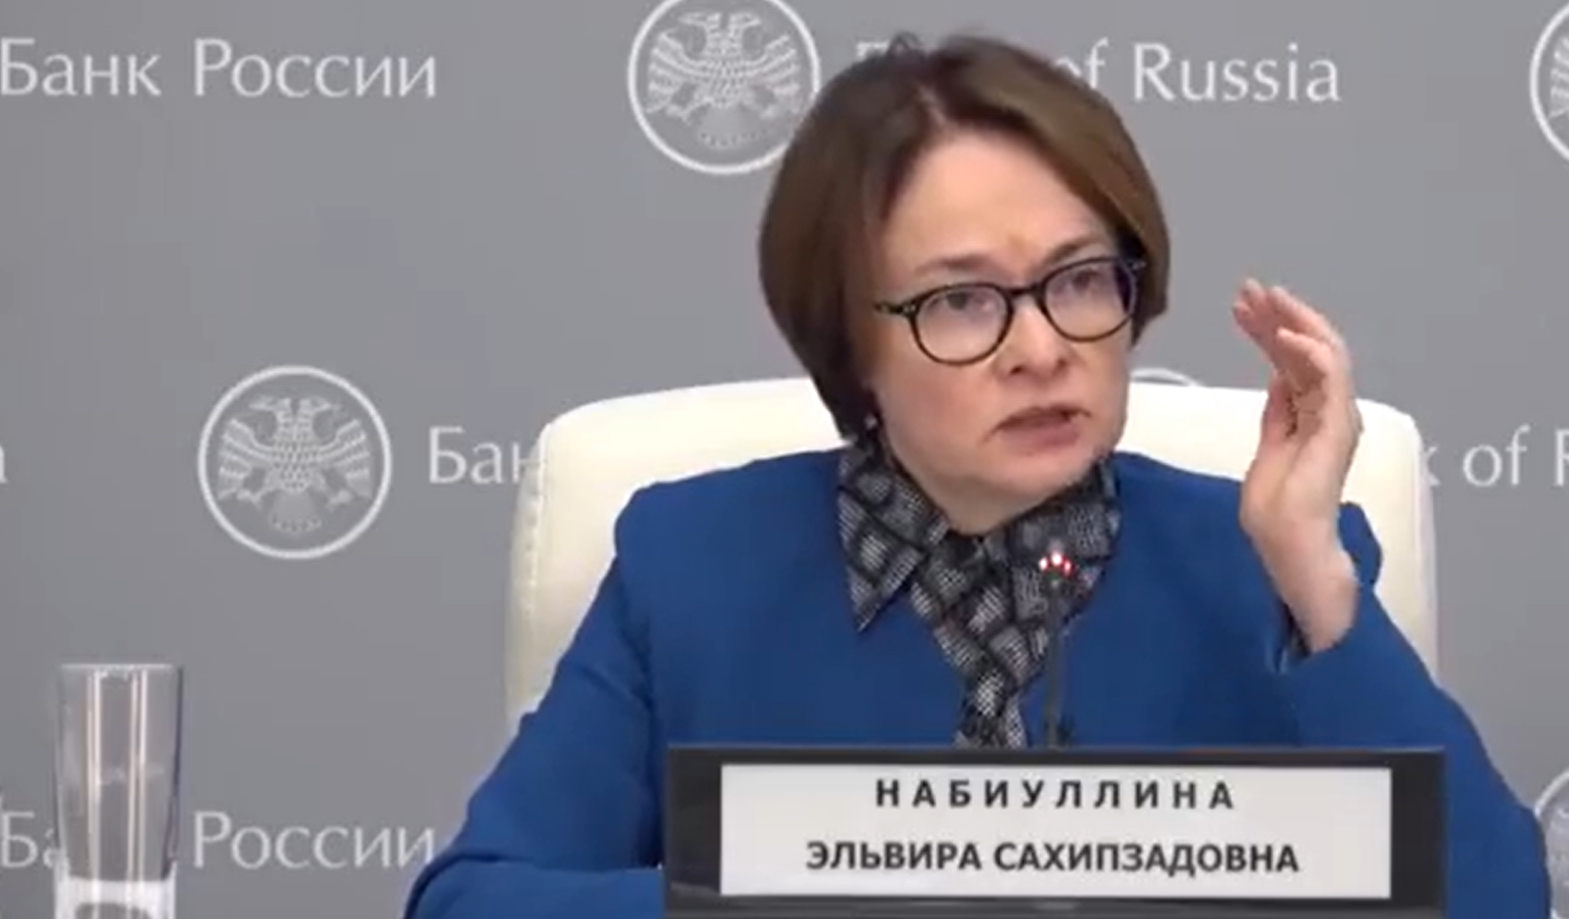 Elvira Nabiullina, the Governor of the Russian Central Bank, speaking about the digital ruble project at a press conference on September 15.